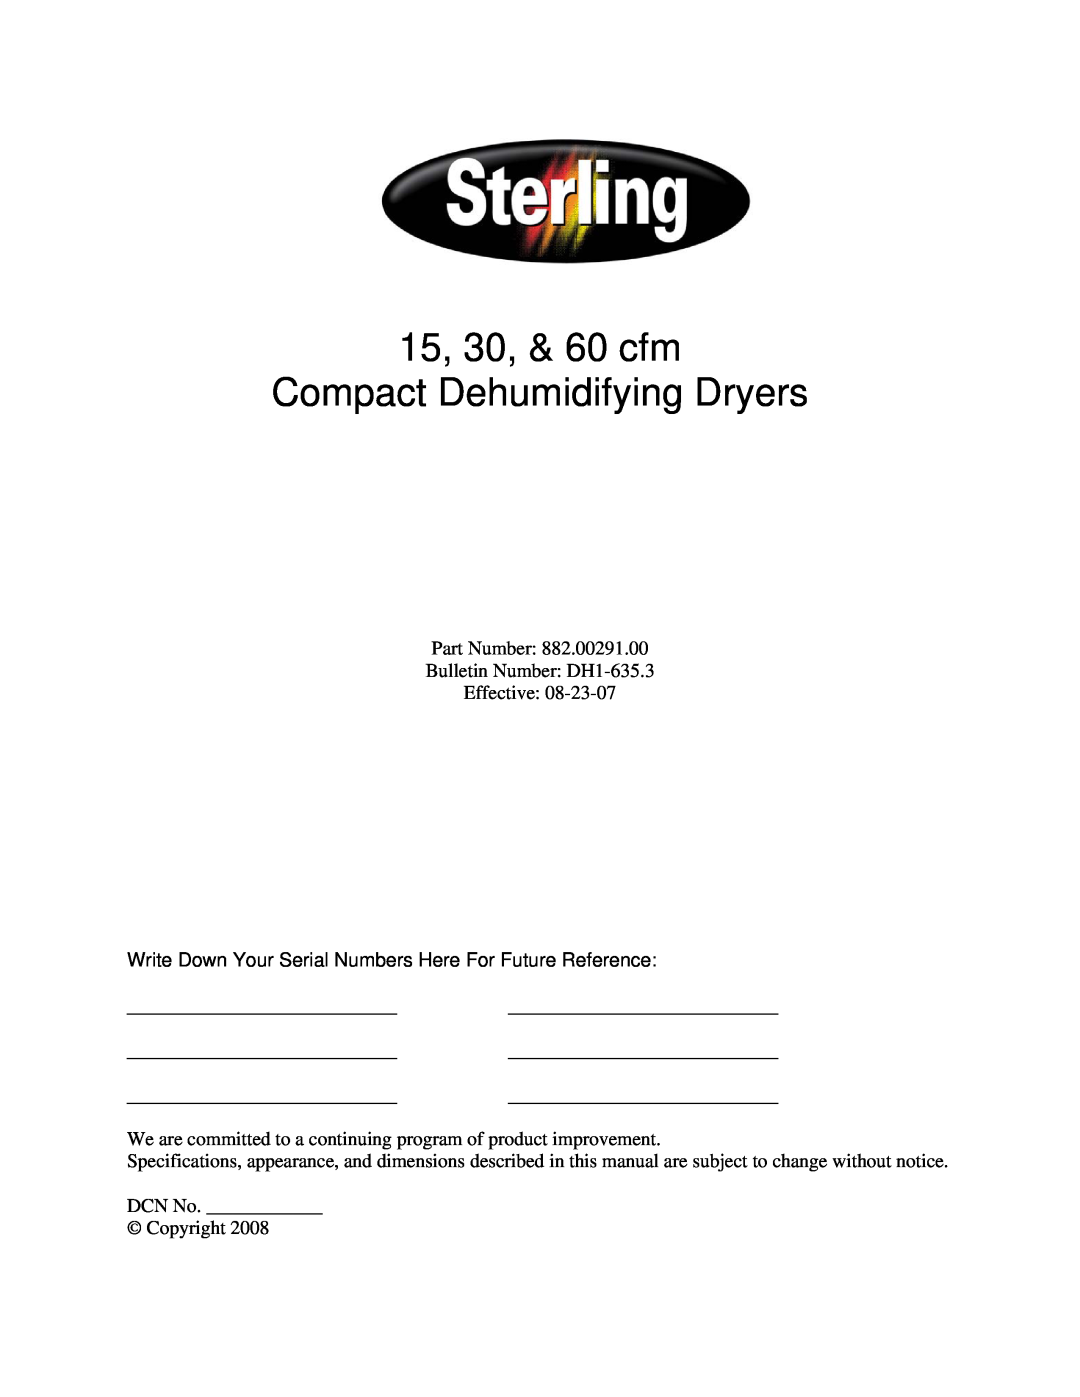 Sterling 882.00291.00 specifications 15, 30, & 60 cfm Compact Dehumidifying Dryers 